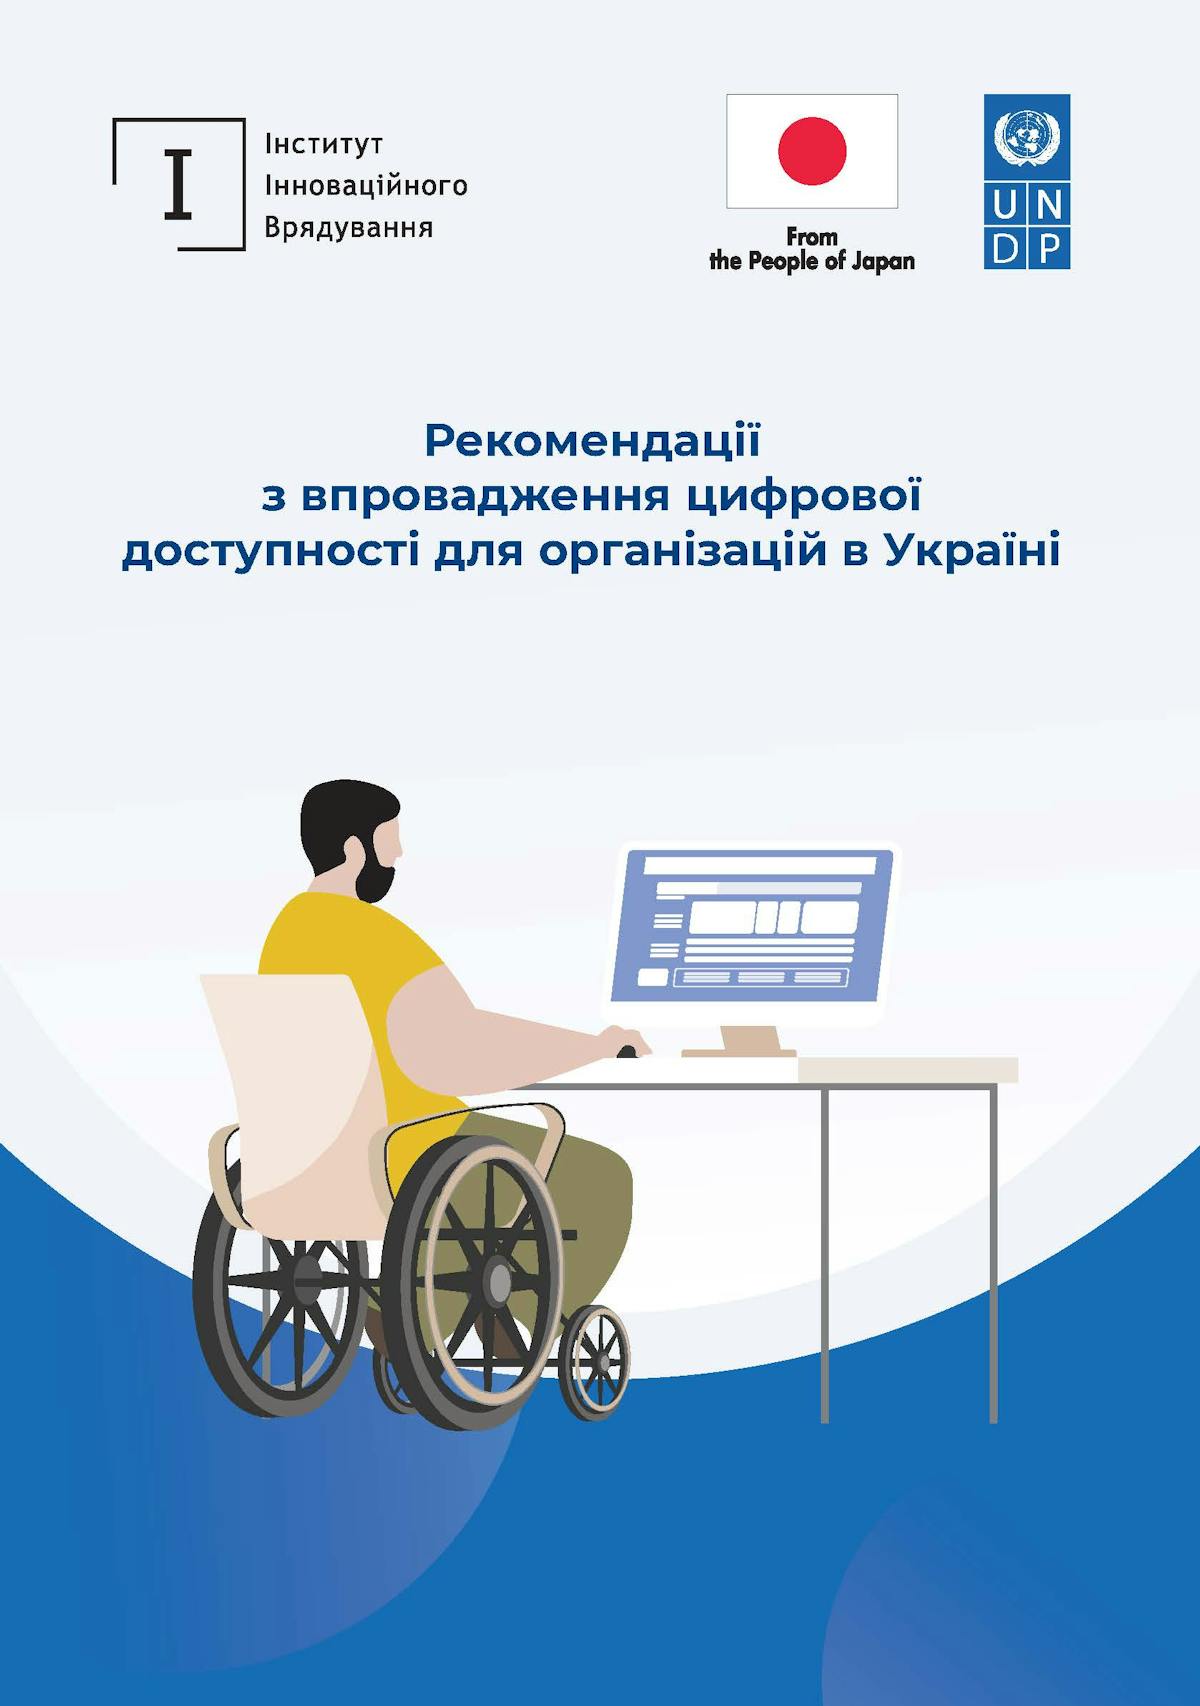 Poster for the Digital Accessibility Guidelines for Organizations in Ukraine with logos of the Institute of Innovative Governance, UNDP and From the People of Japan